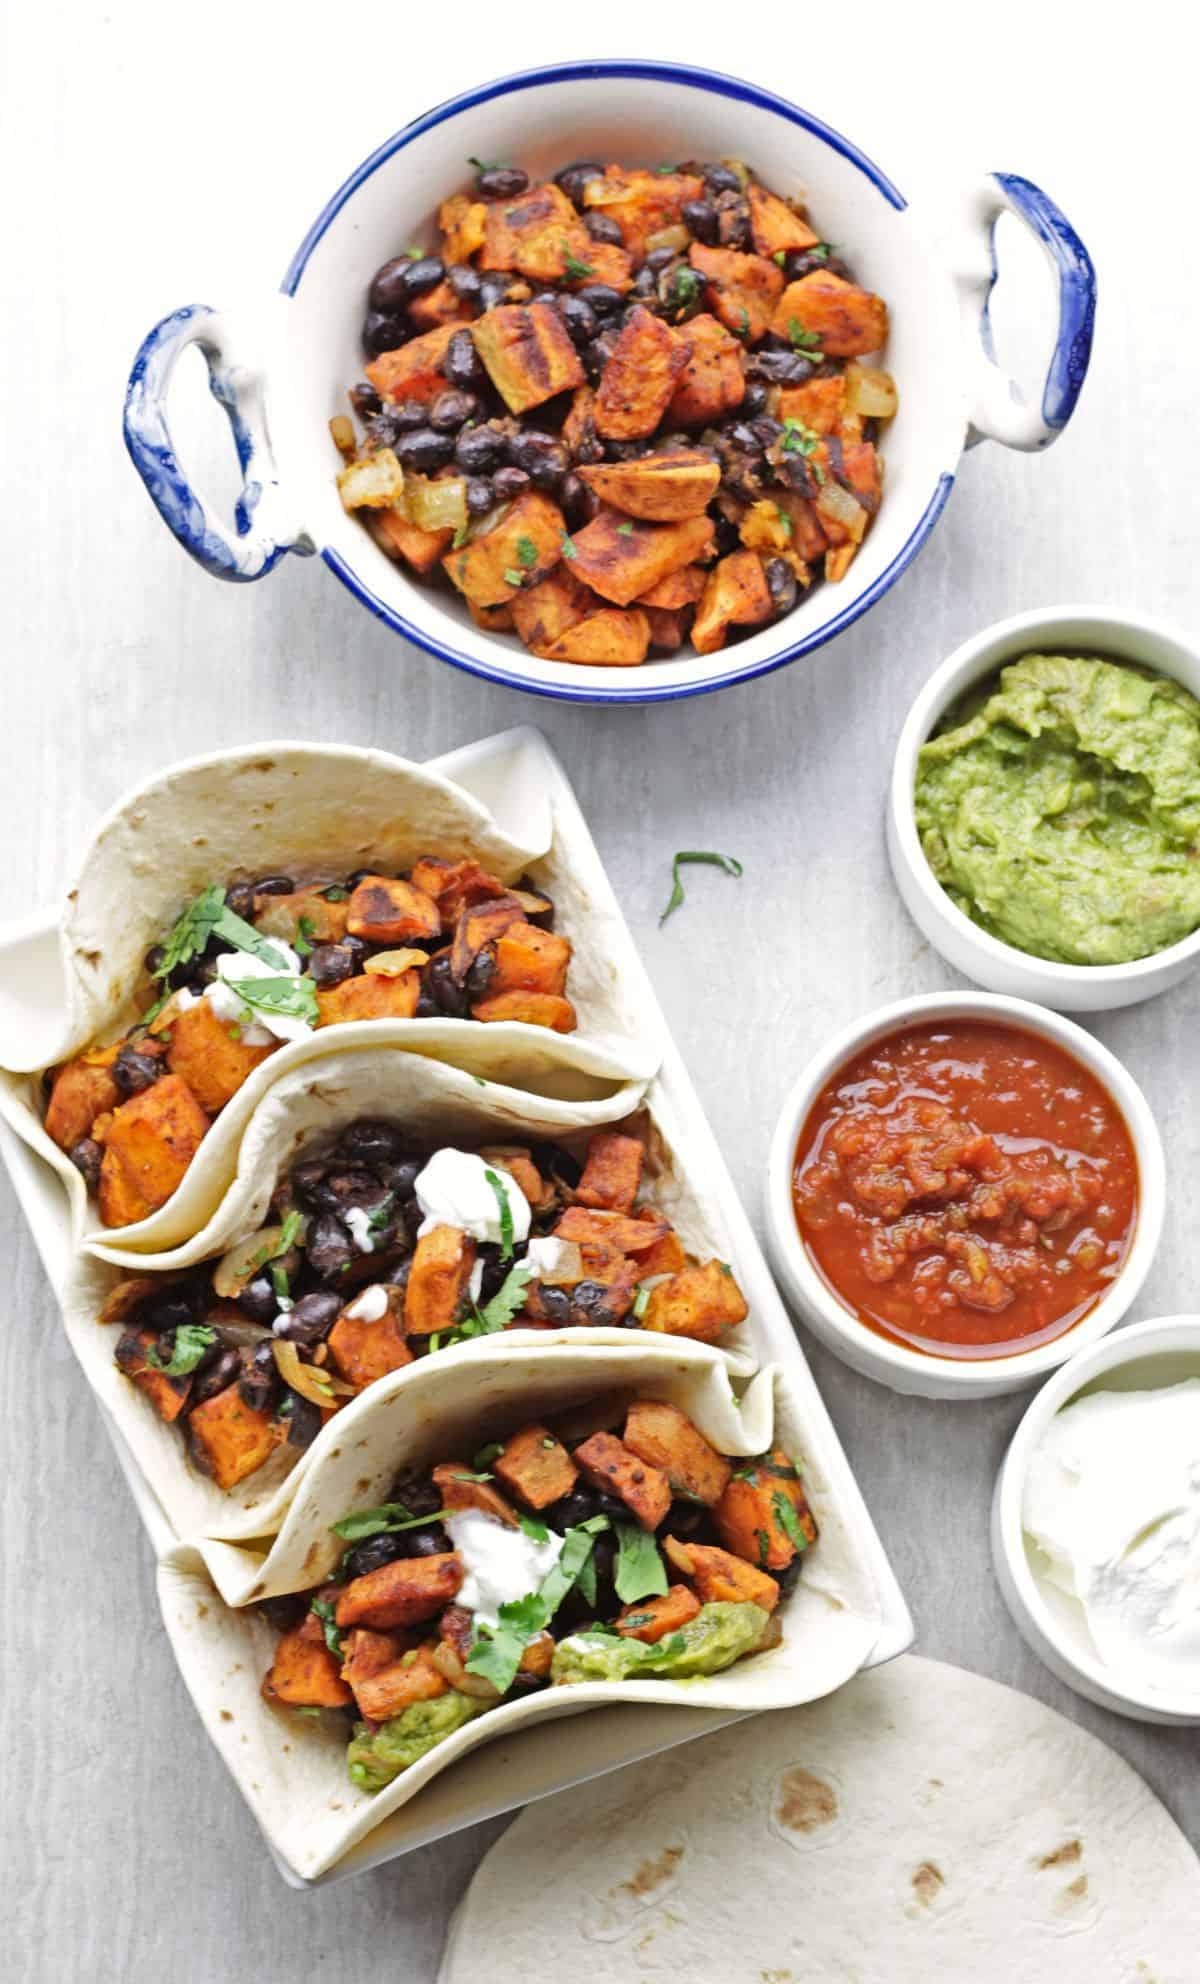 three soft tacos with black beans and sweet potato and salsa, sour cream and guacamole on the side.